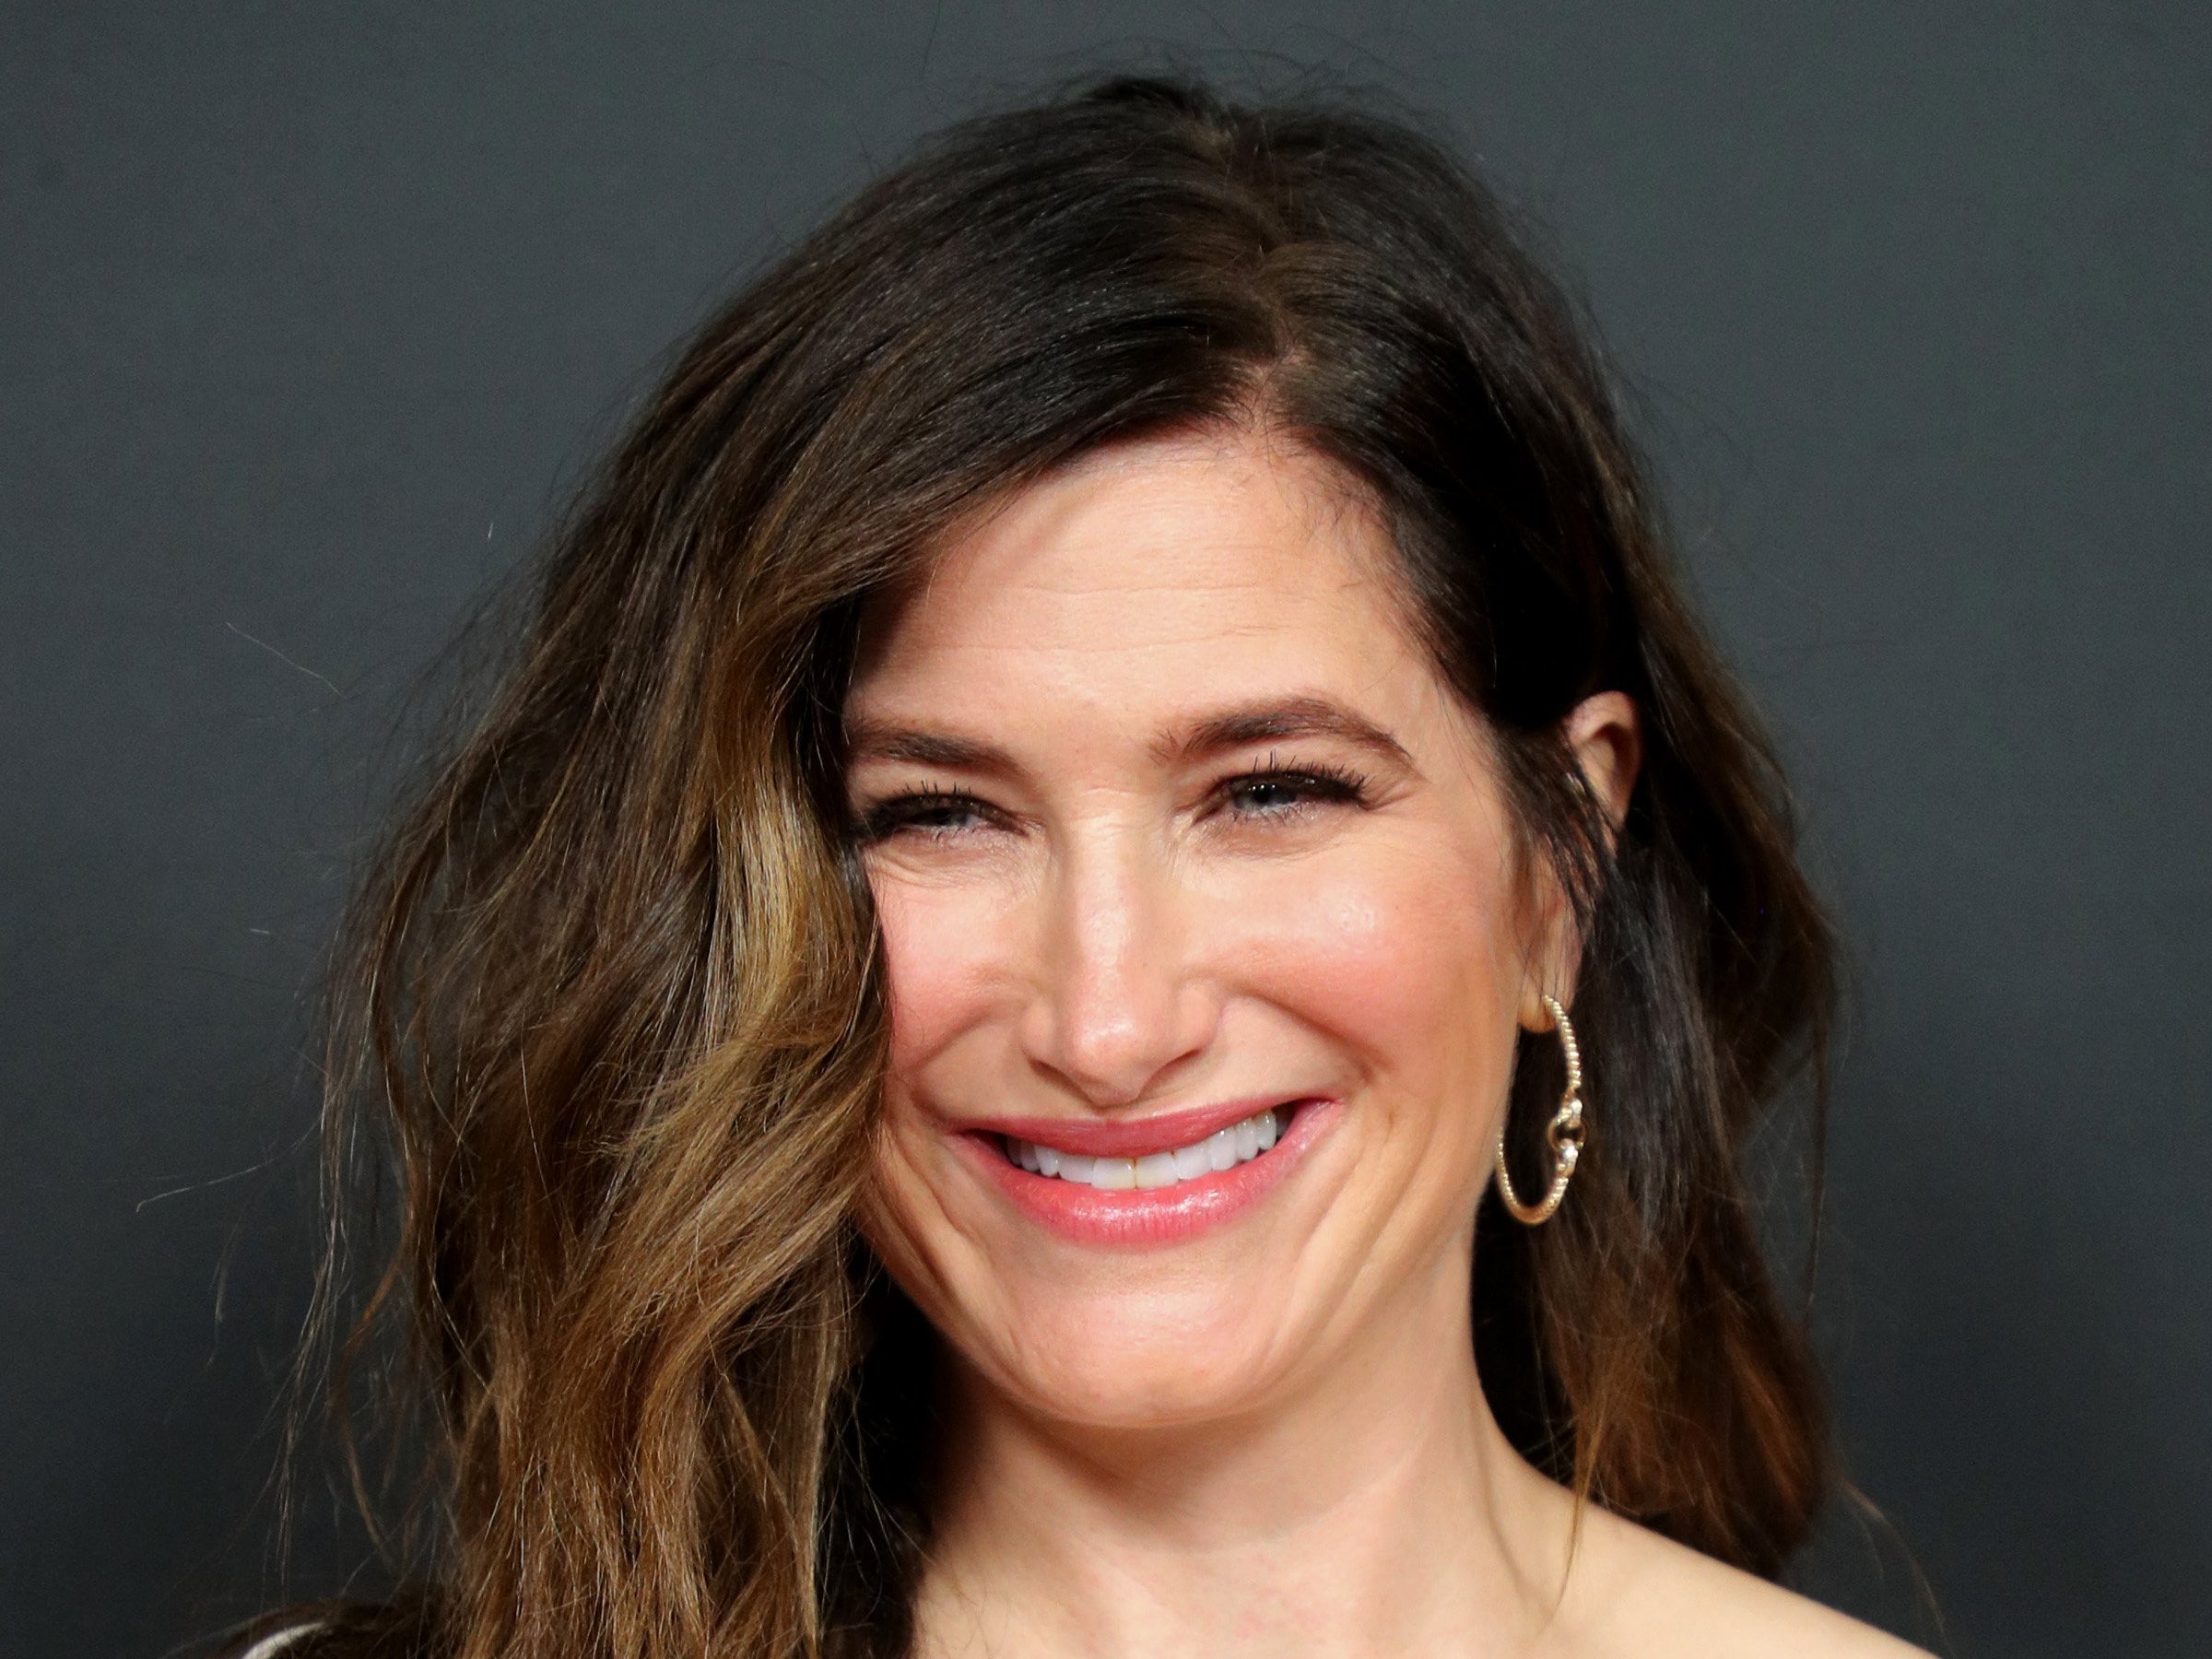 Kathryn Hahn is still surprised to have had the opportunity to act in a superhero universe